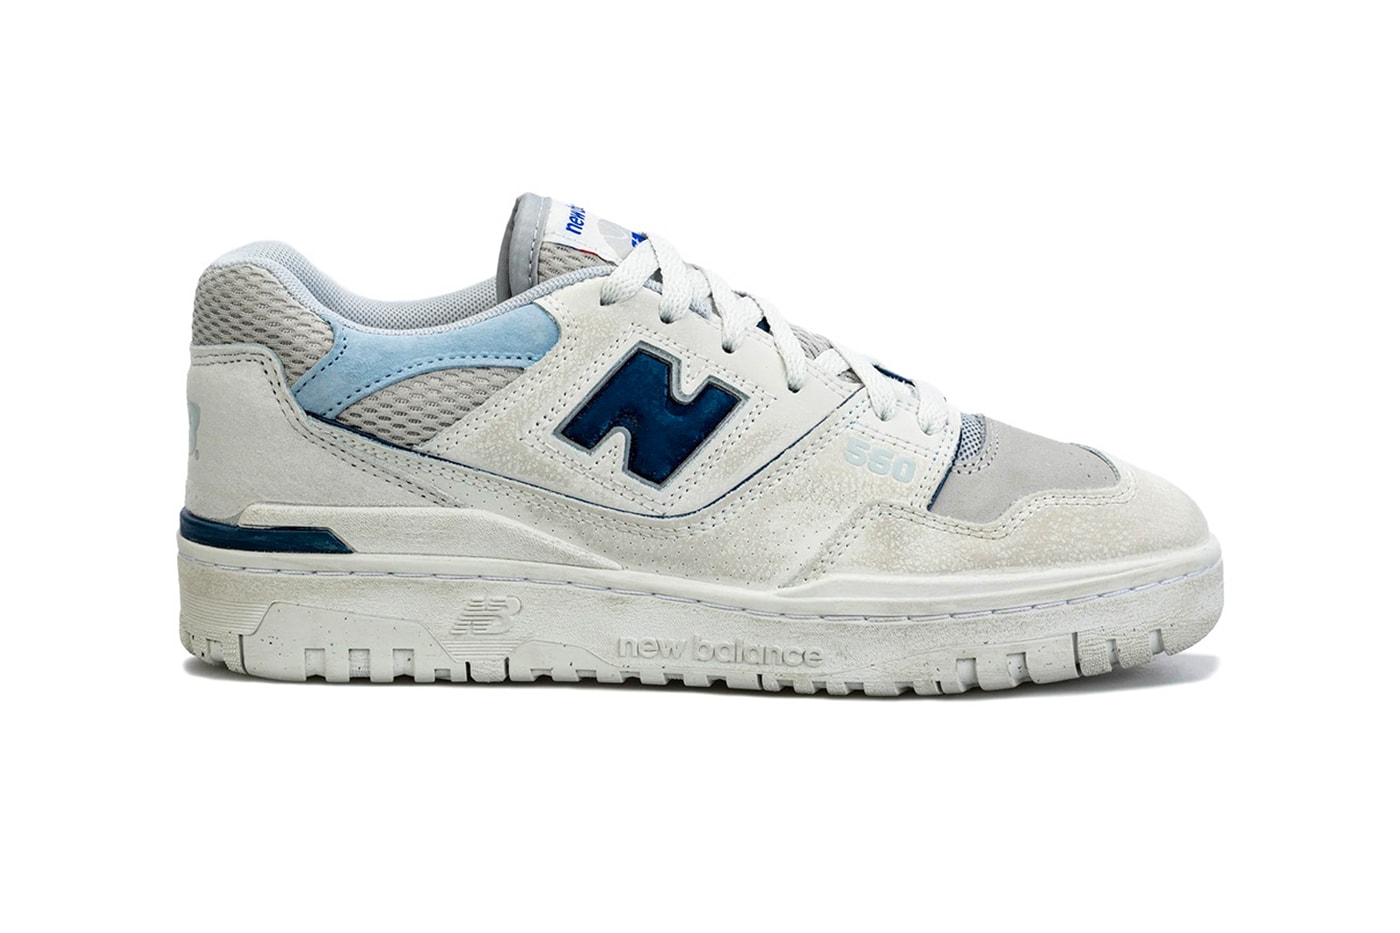 New Balance 550 Weathered White/Grey/Blue Release